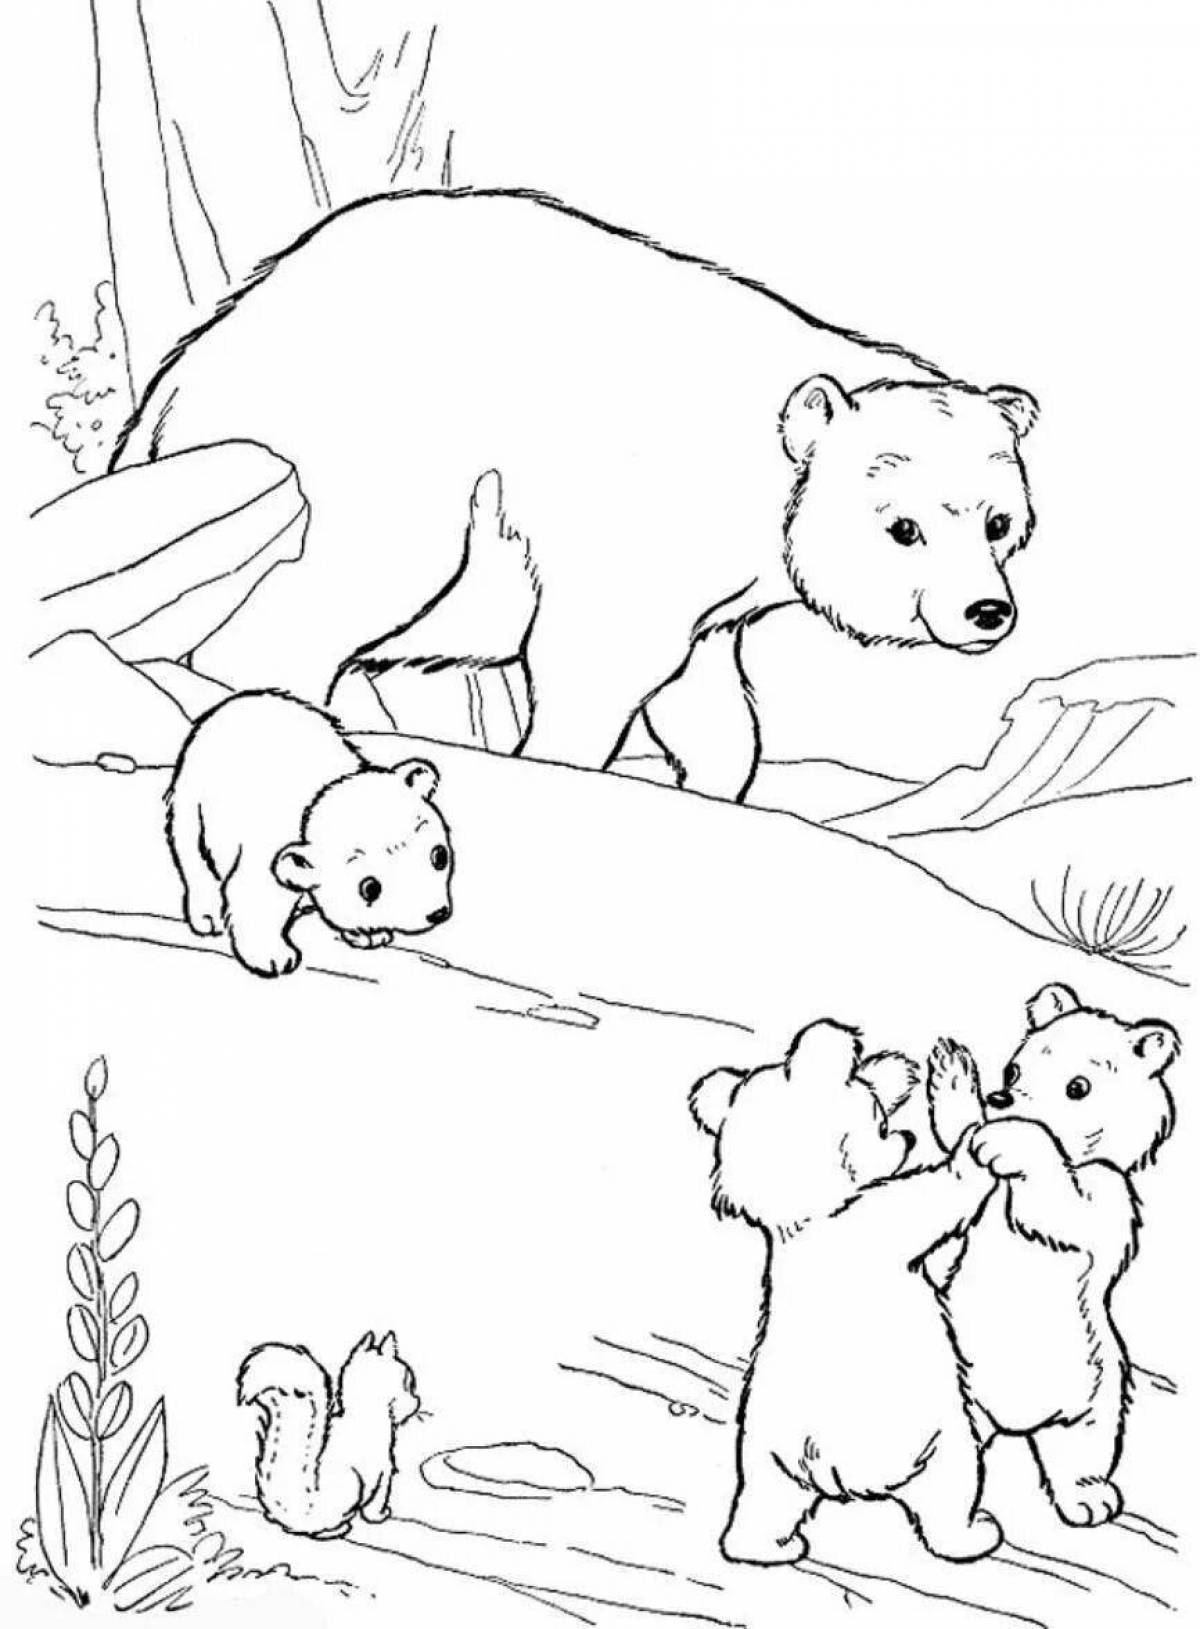 Coloring page majestic bear in the forest